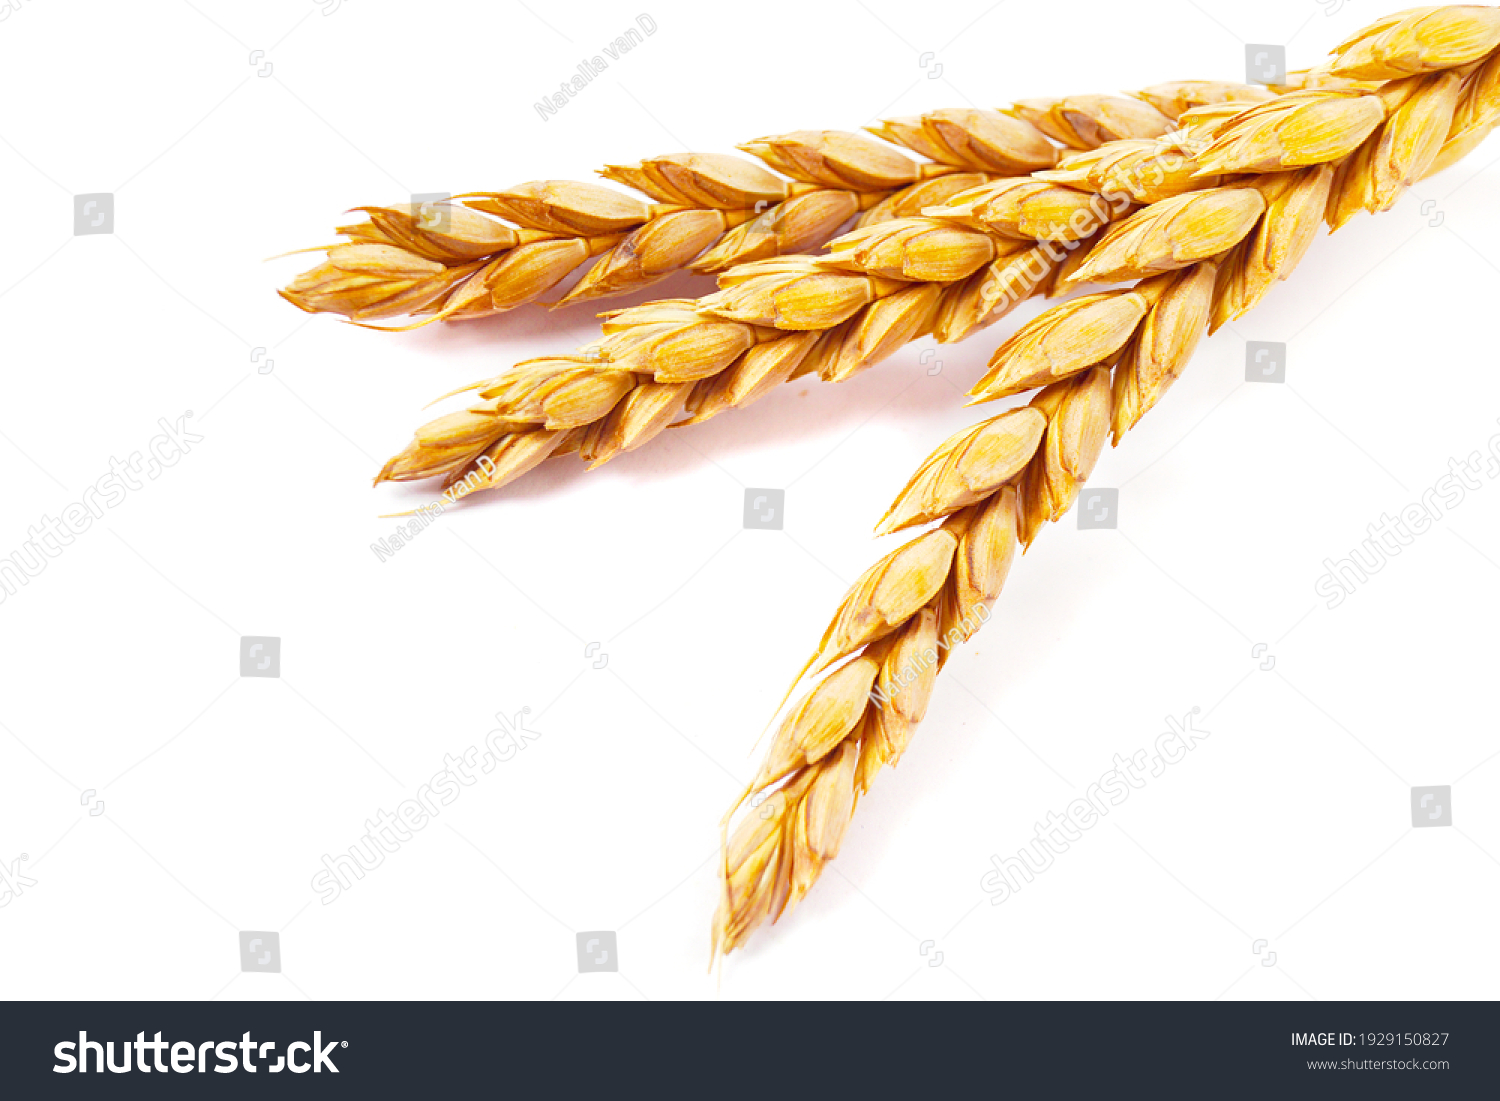 a bright closeup of a bunch of golden ripe dinkel hulled wheat Spelt Spelt (Triticum spelta dicoccum) rye grain relict crop health food ready for harvest isolated on white #1929150827